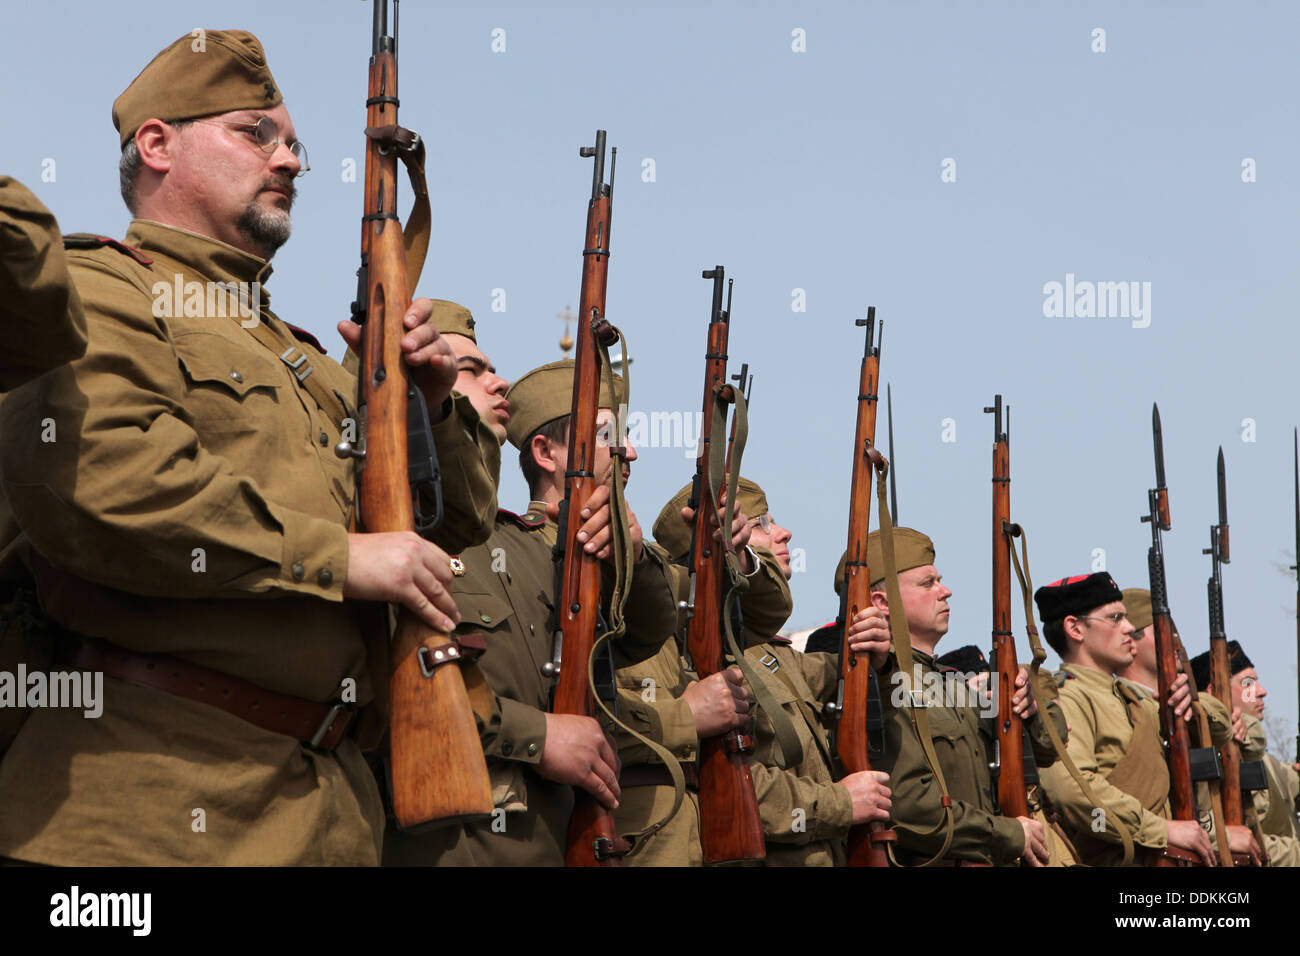 Re-enactors dressed as Soviet soldiers attend a ceremony at the cemetery in Orechov, Czech Republic. Stock Photo